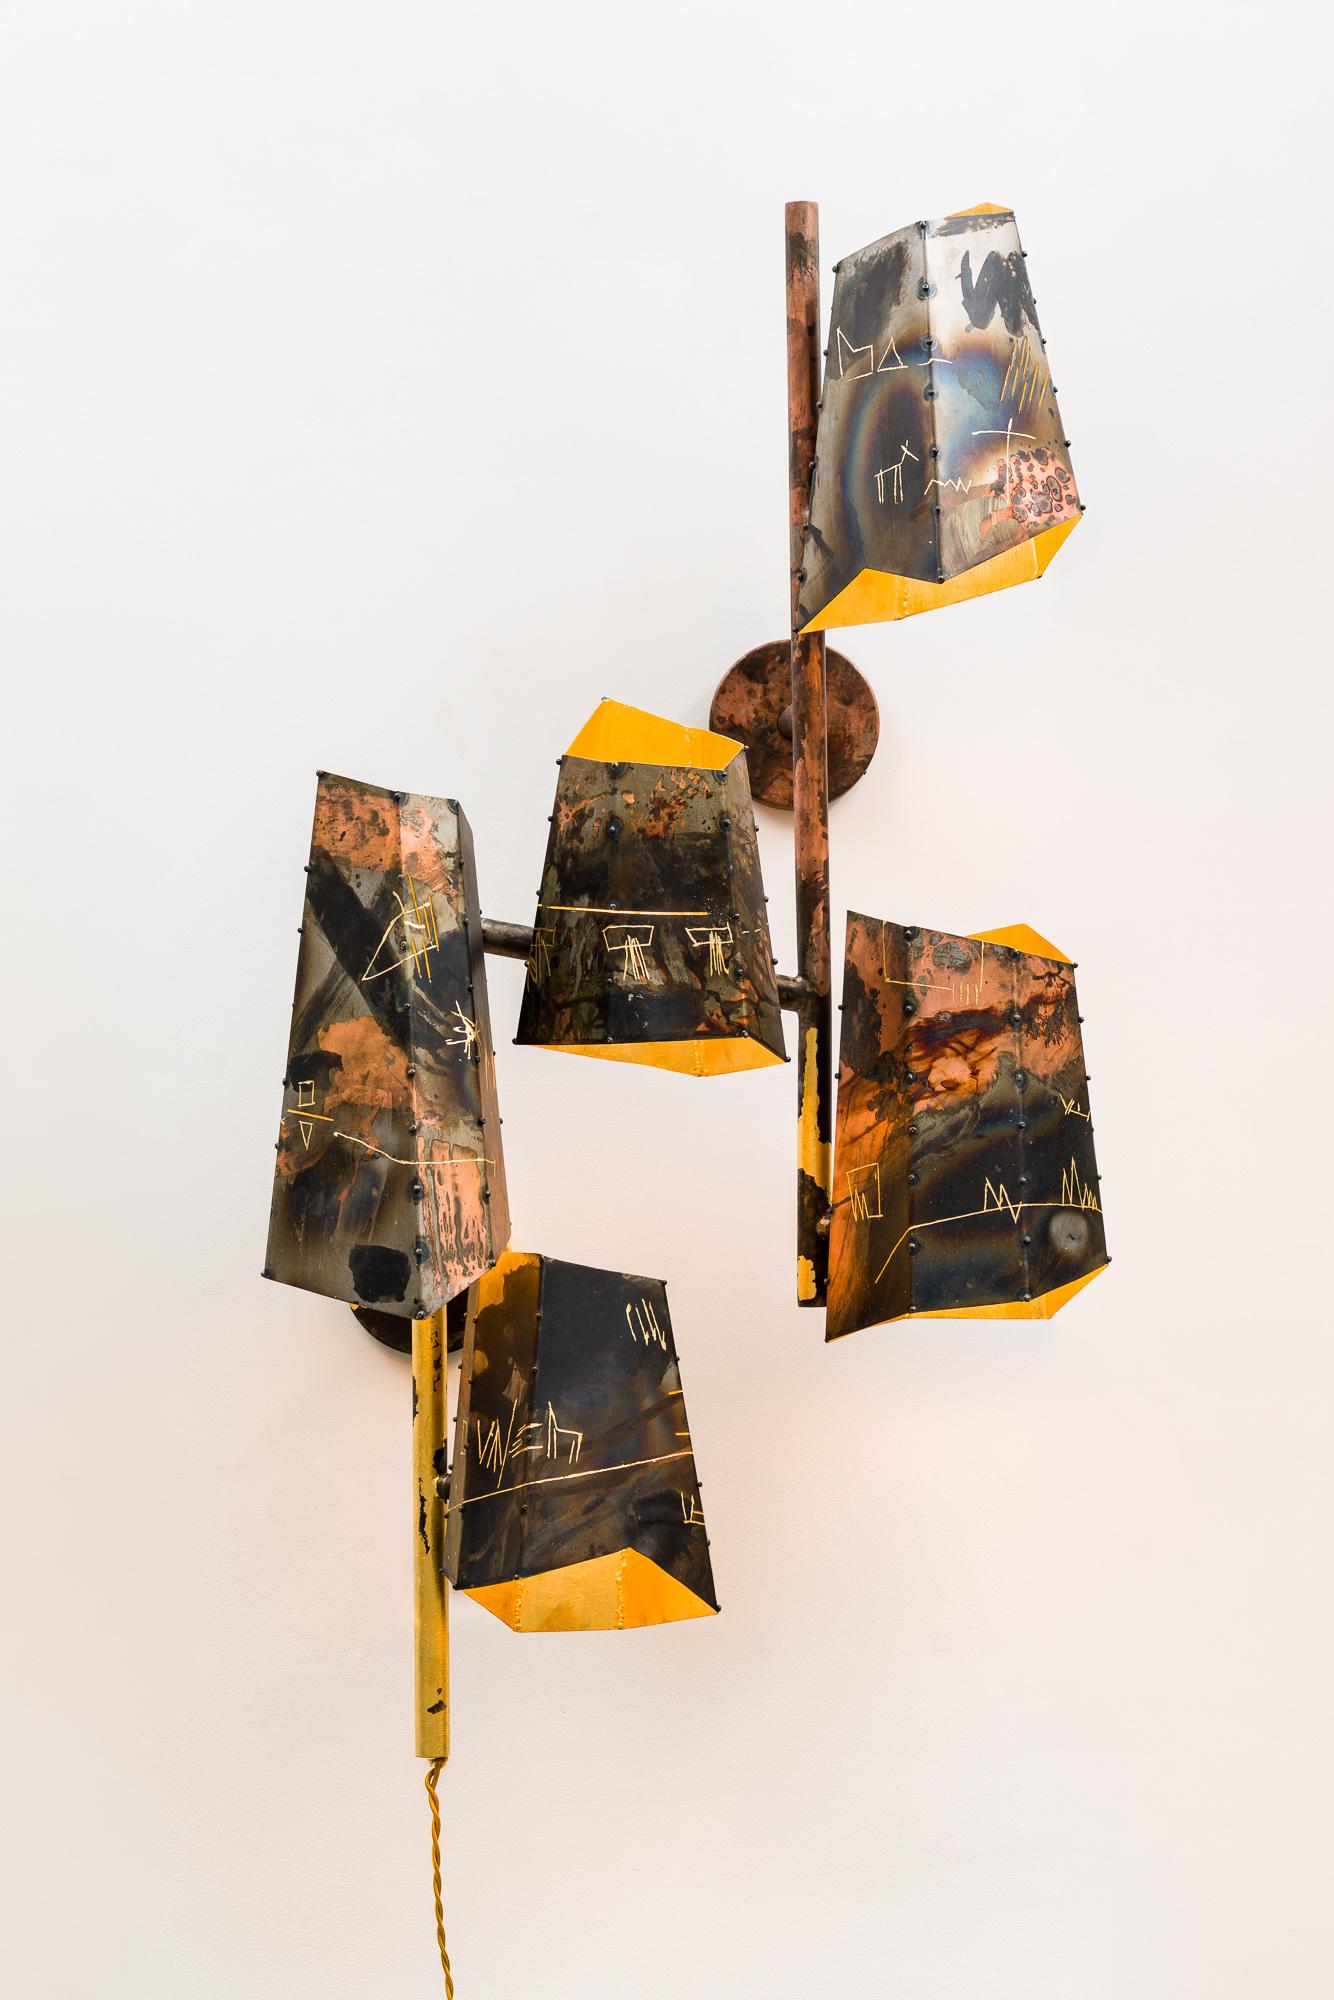 Five hand-built steel shades are mounted onto vertical posts at various heights creating an organic cluster of asymmetric forms. Each shade is cut and welded individually, before patinas are applied. An abstract language of semi-pictographic images